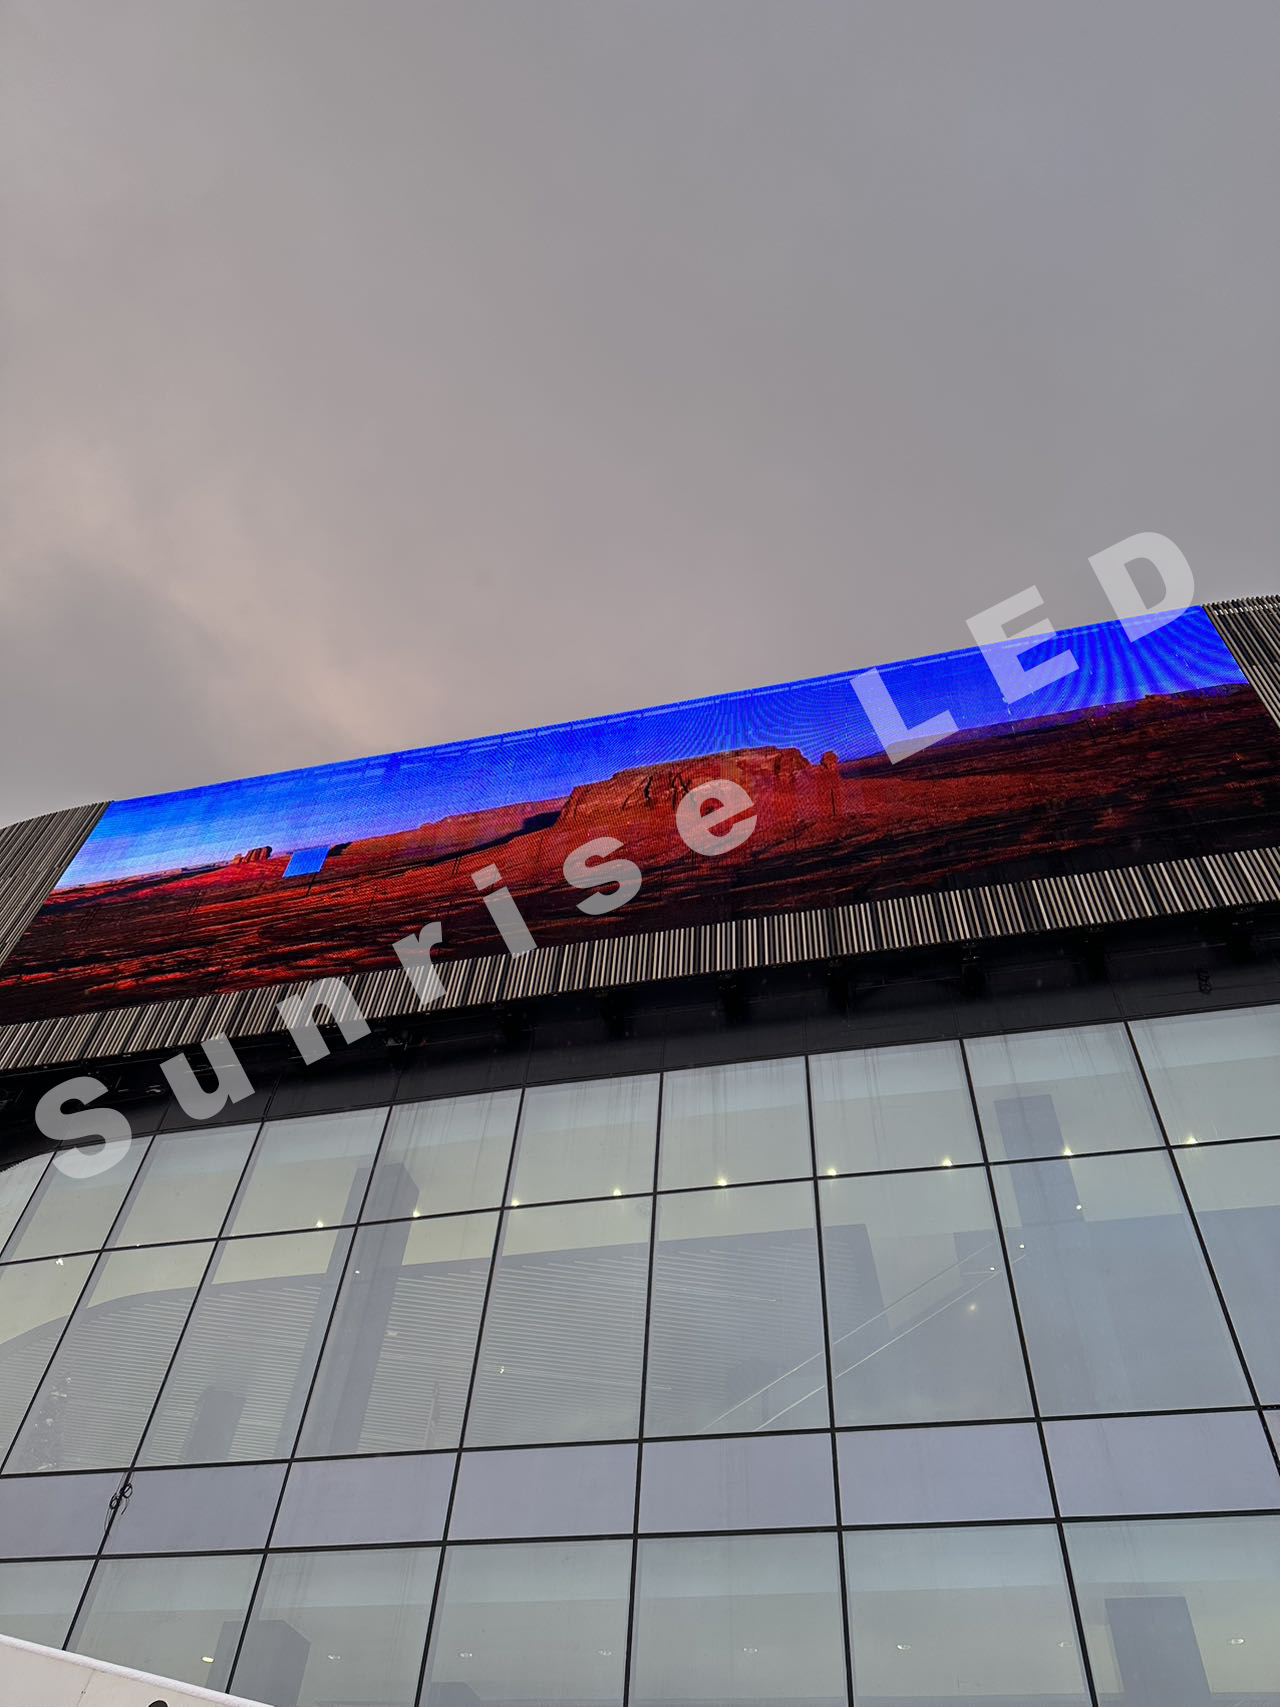 270 square meters Mesh LED display project in Russia